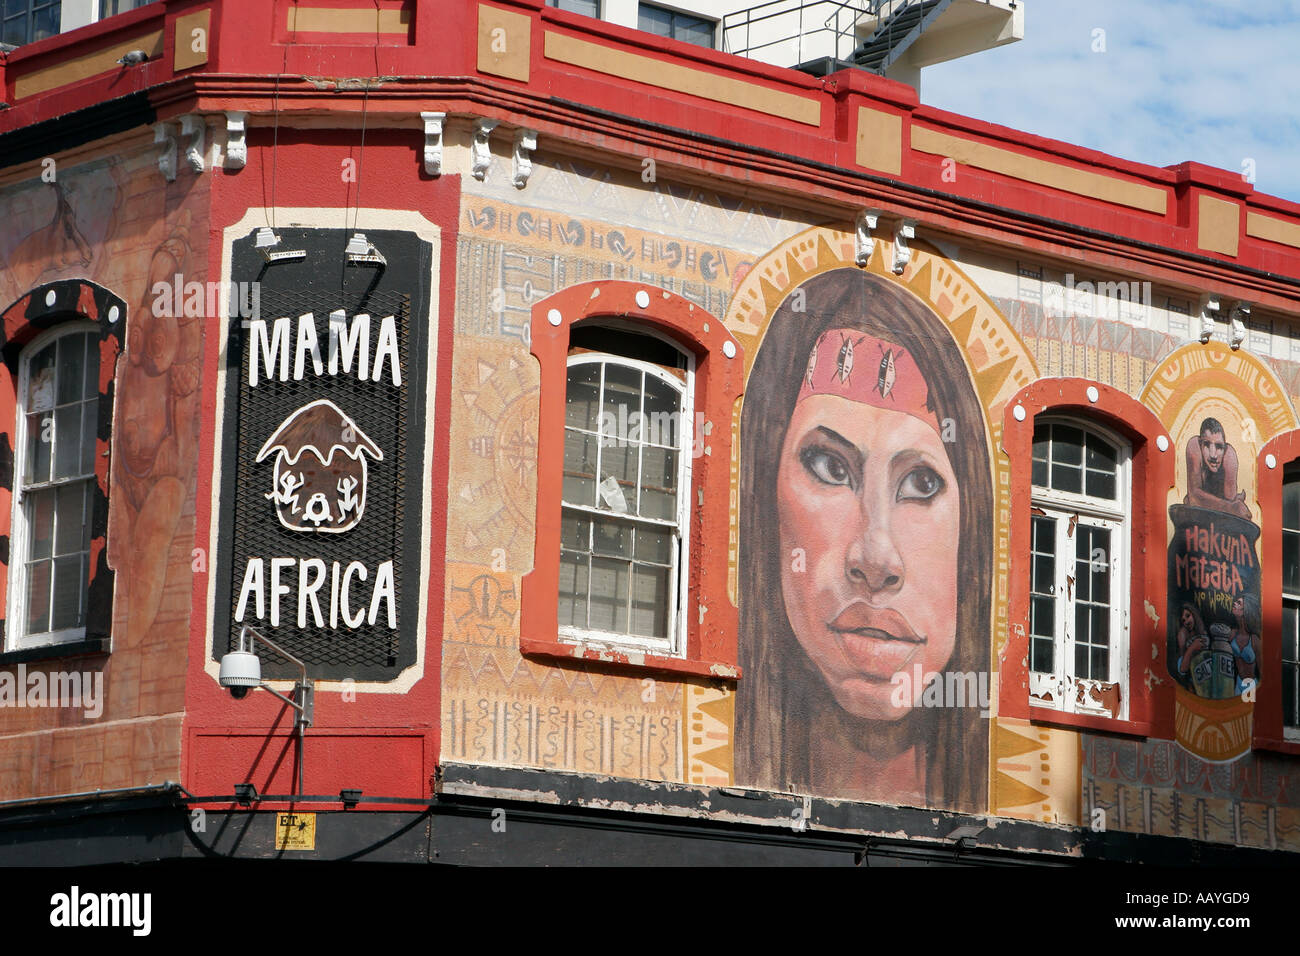 south africa cape town Long Street Mama Africa bar and restaurant painted facade Stock Photo